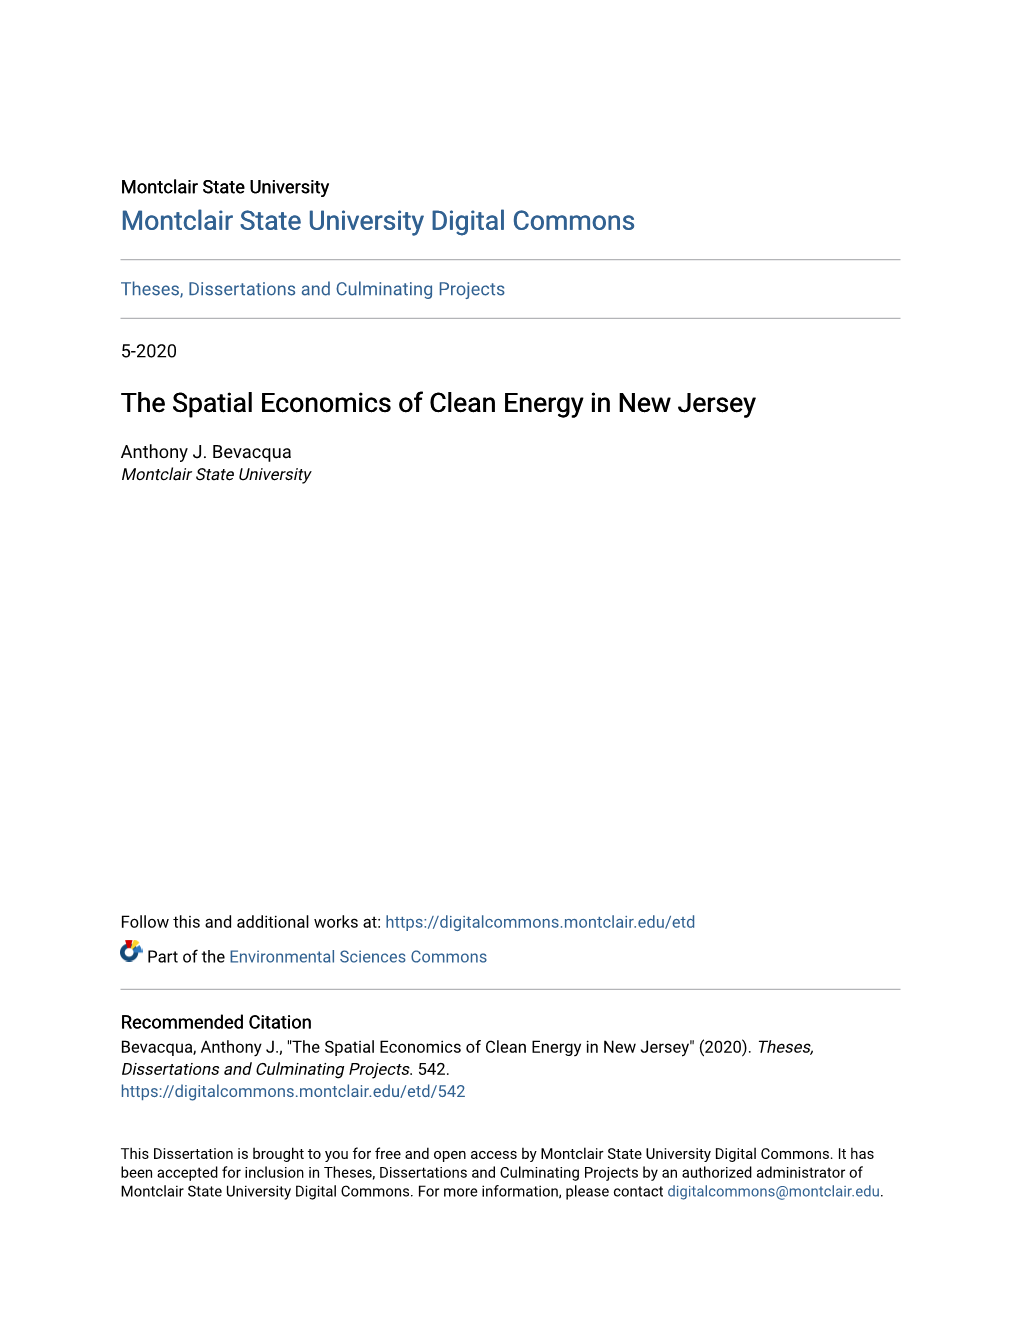 The Spatial Economics of Clean Energy in New Jersey